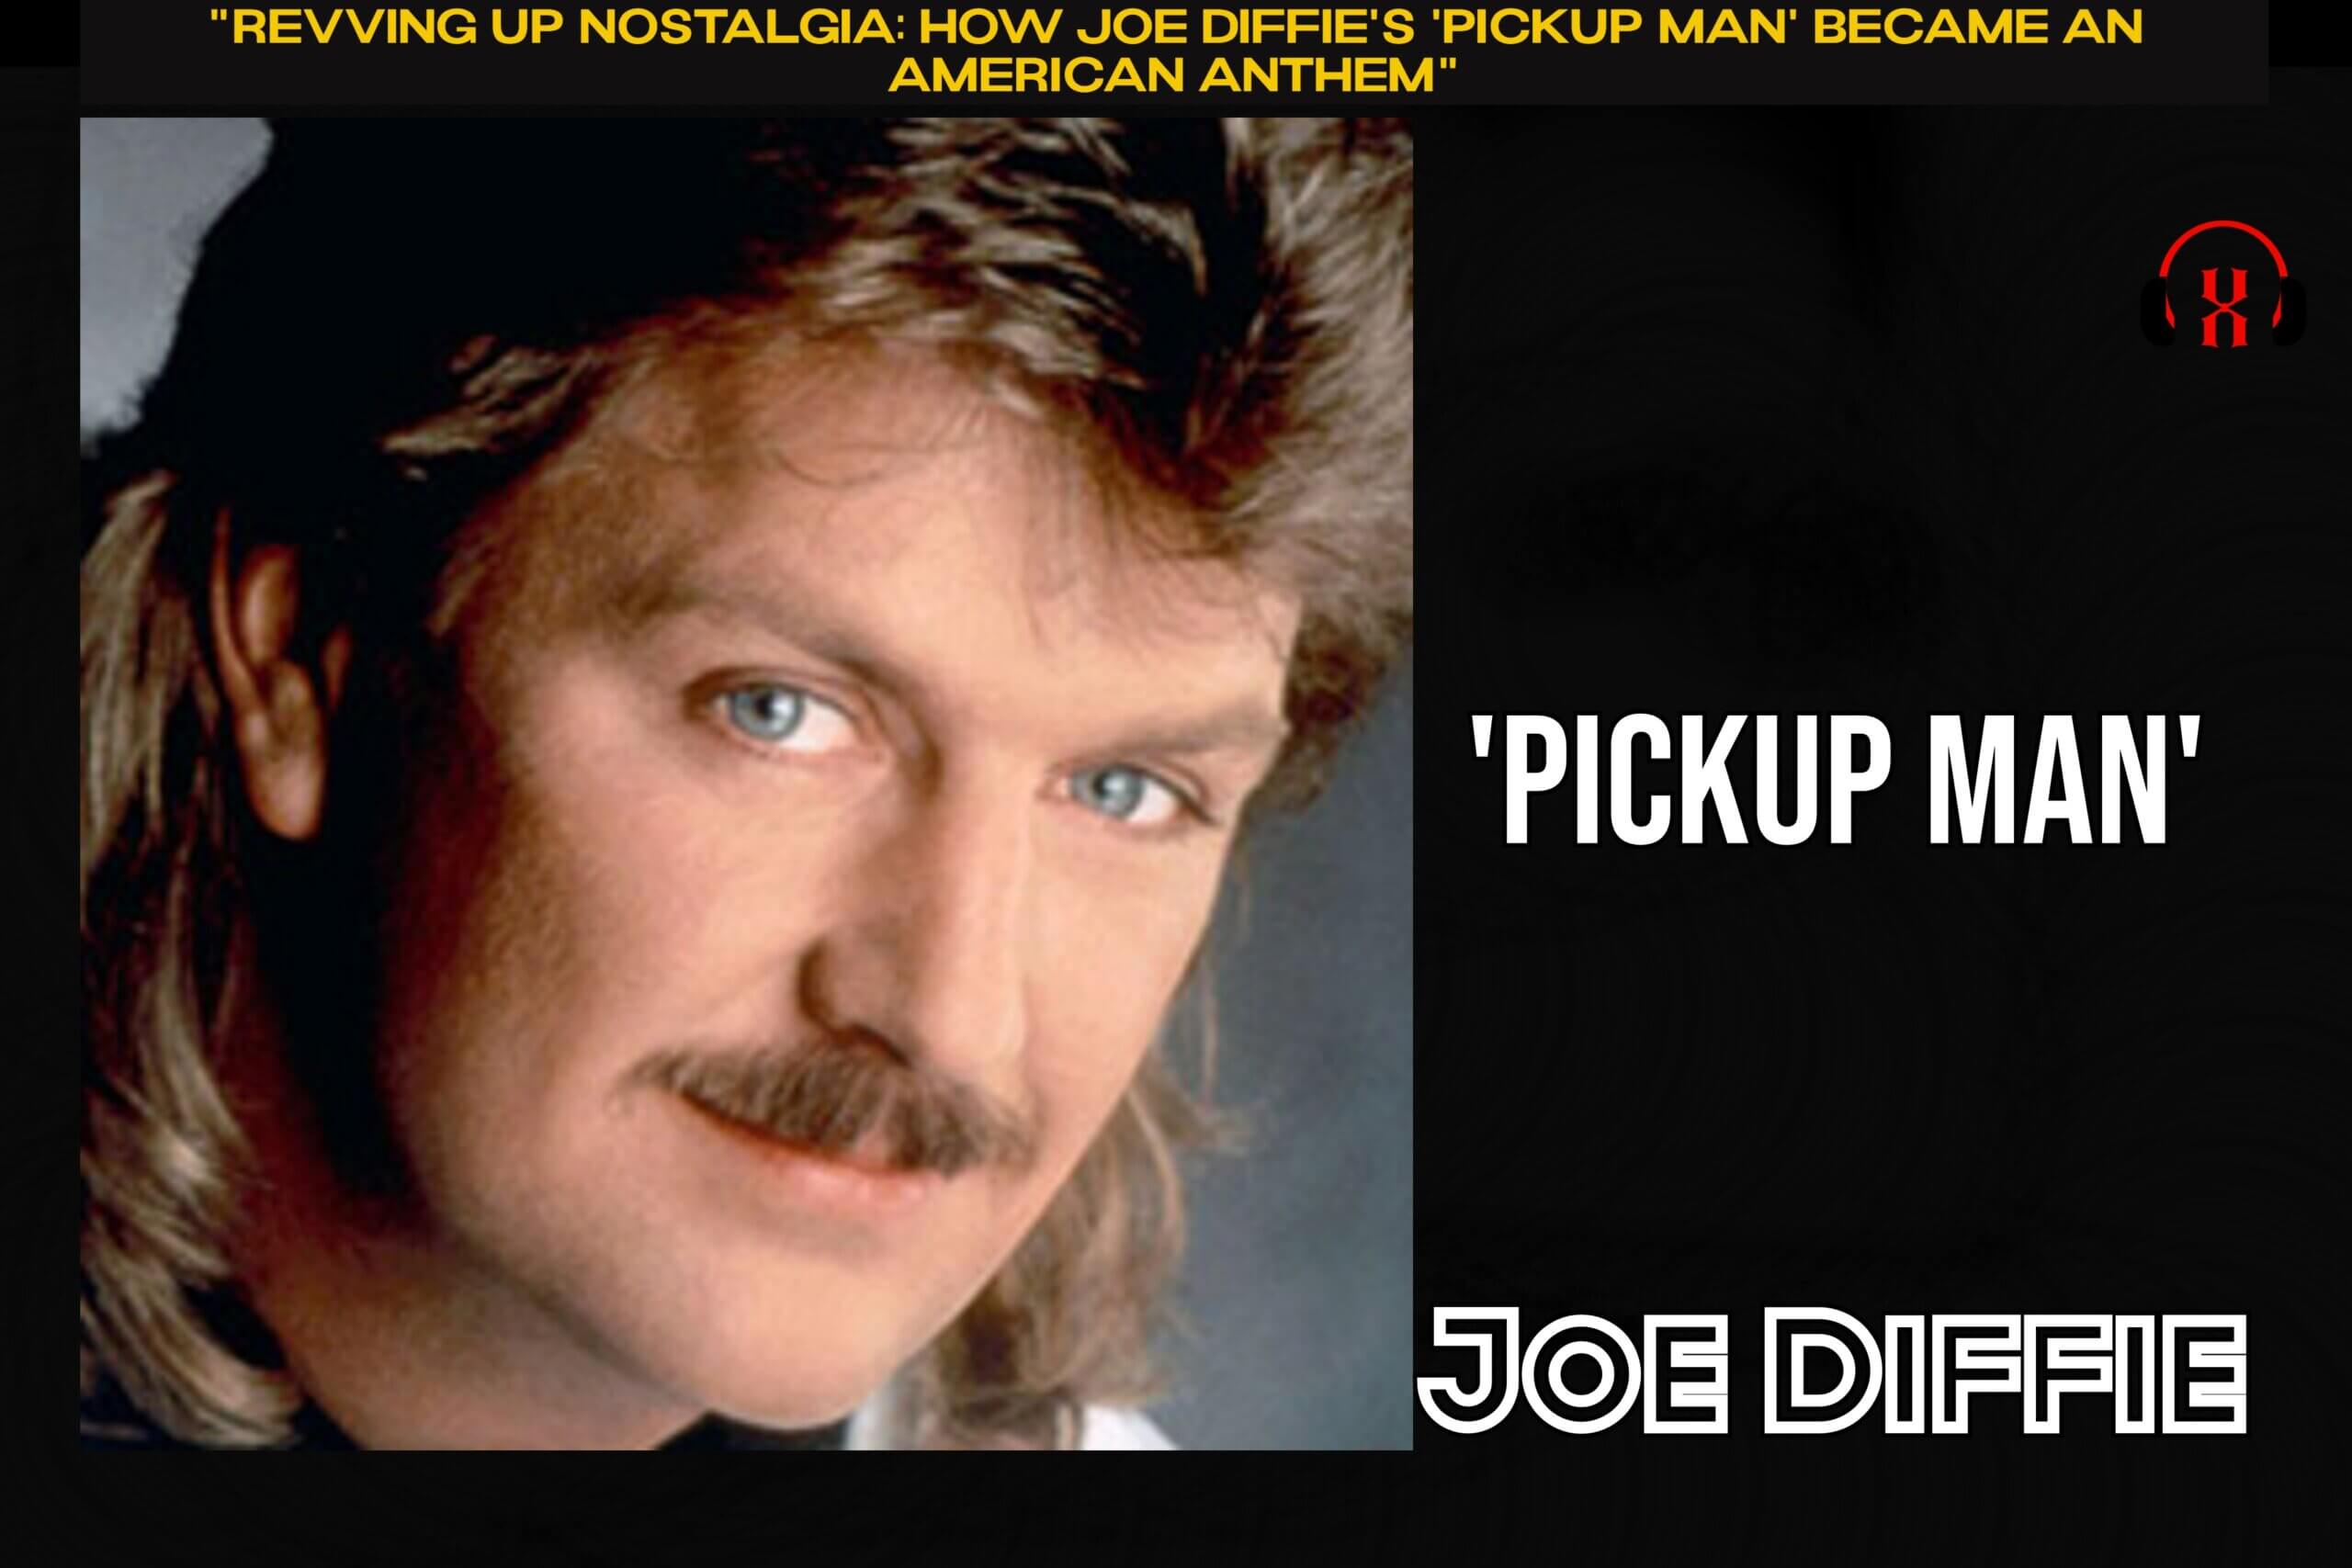 “Revving Up Nostalgia: How Joe Diffie’s ‘Pickup Man’ Became an American Anthem”